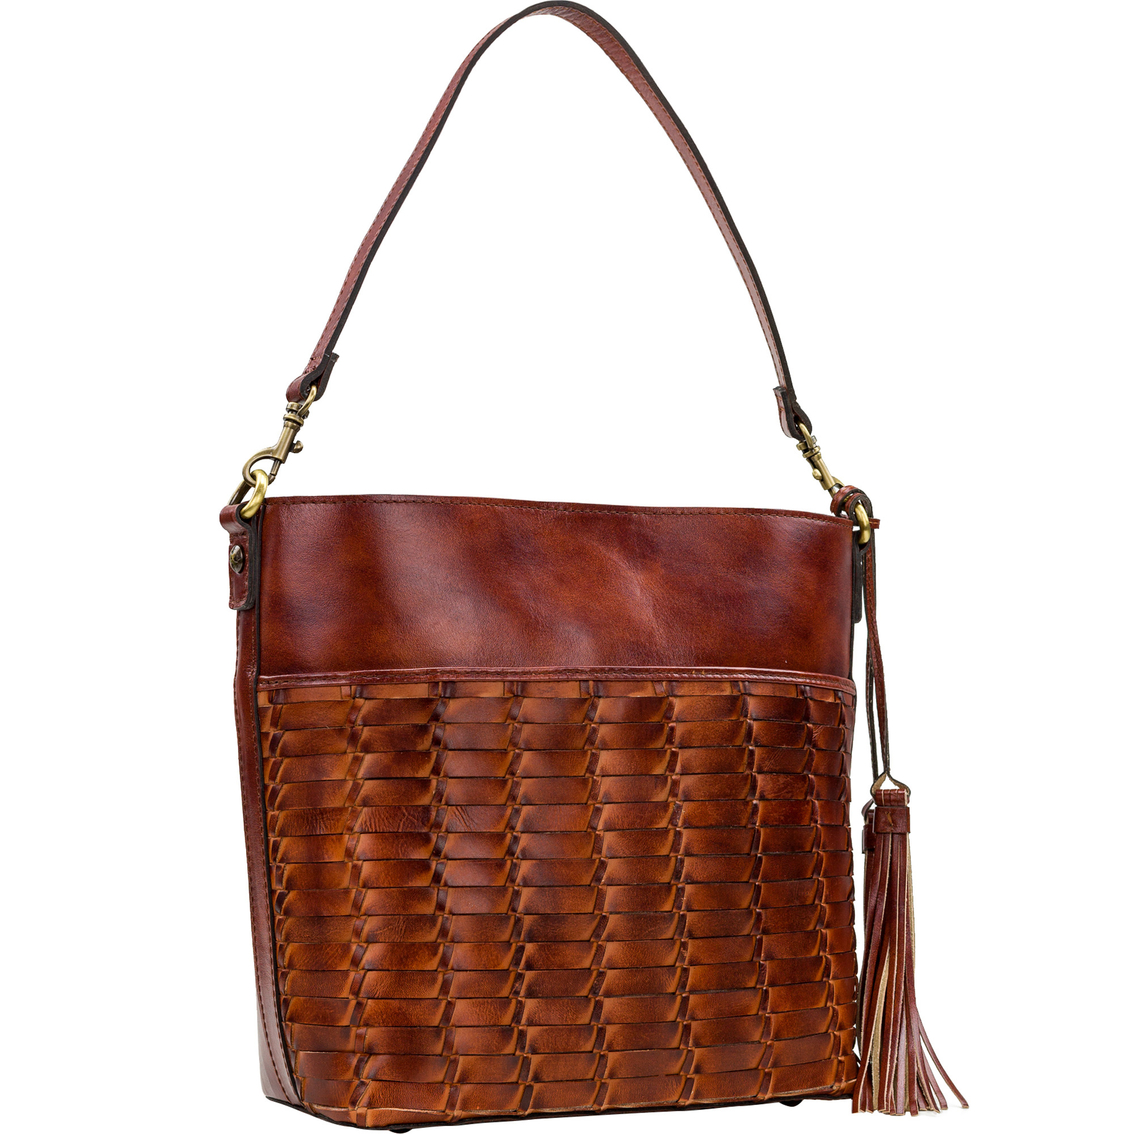 Patricia Nash Harper Woven Tote | Totes & Shoppers | Clothing ...